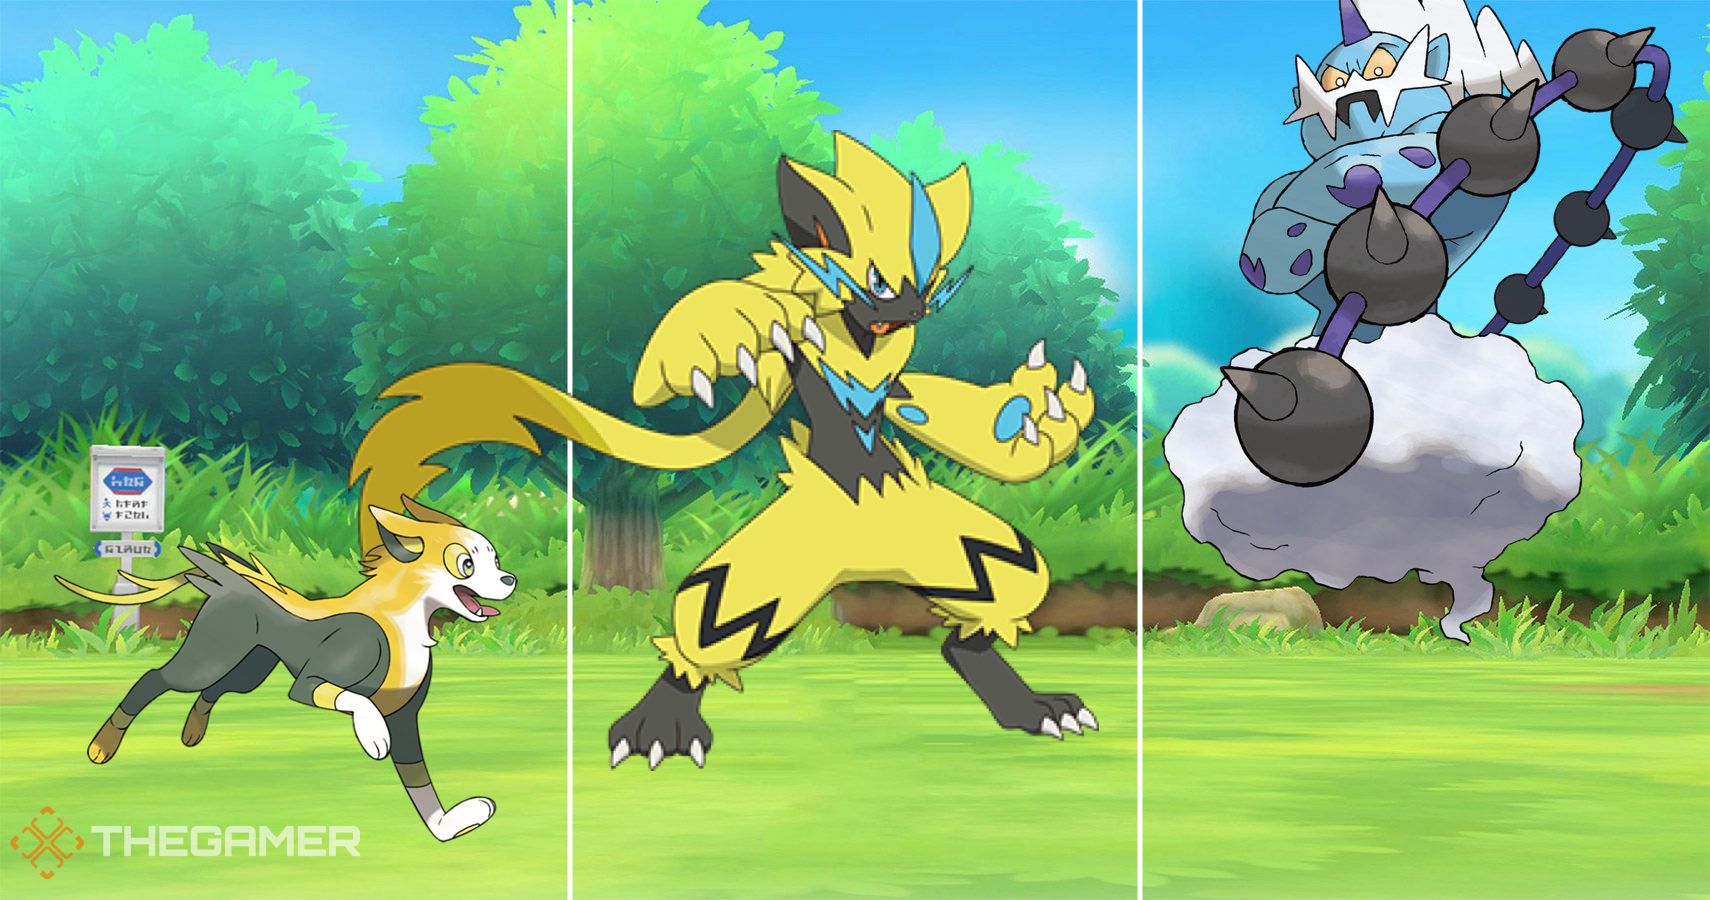 The 20 Best Electric Pokémon of All Time, Ranked